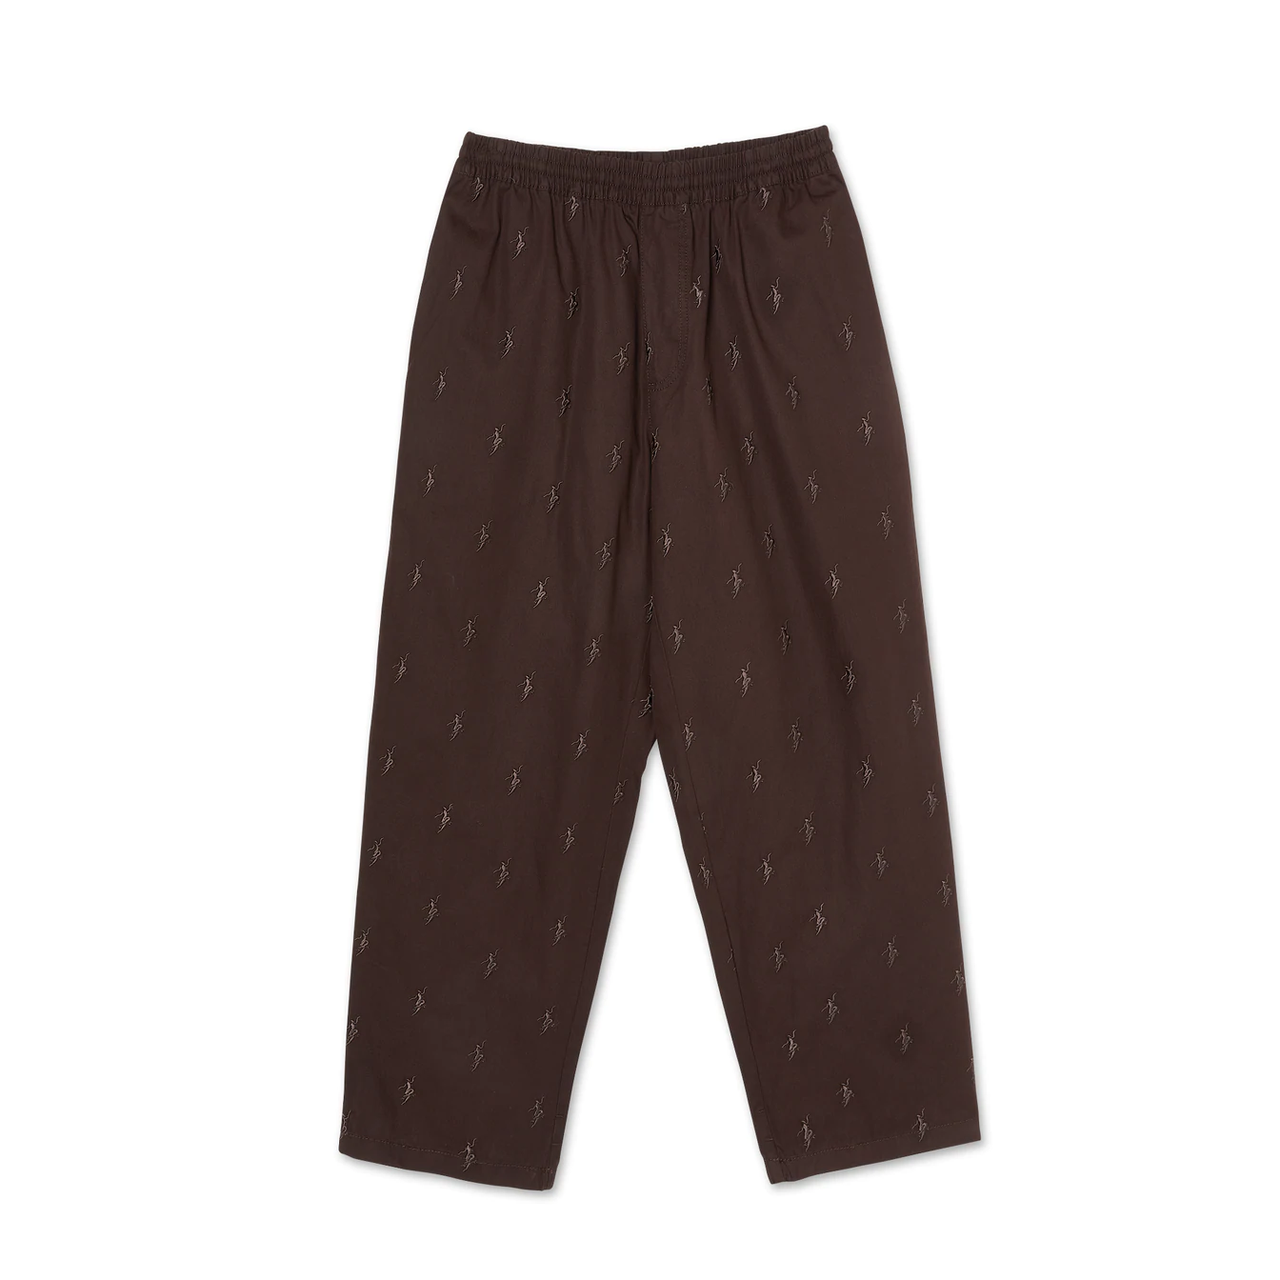 No Comply Surf Pants - Brown